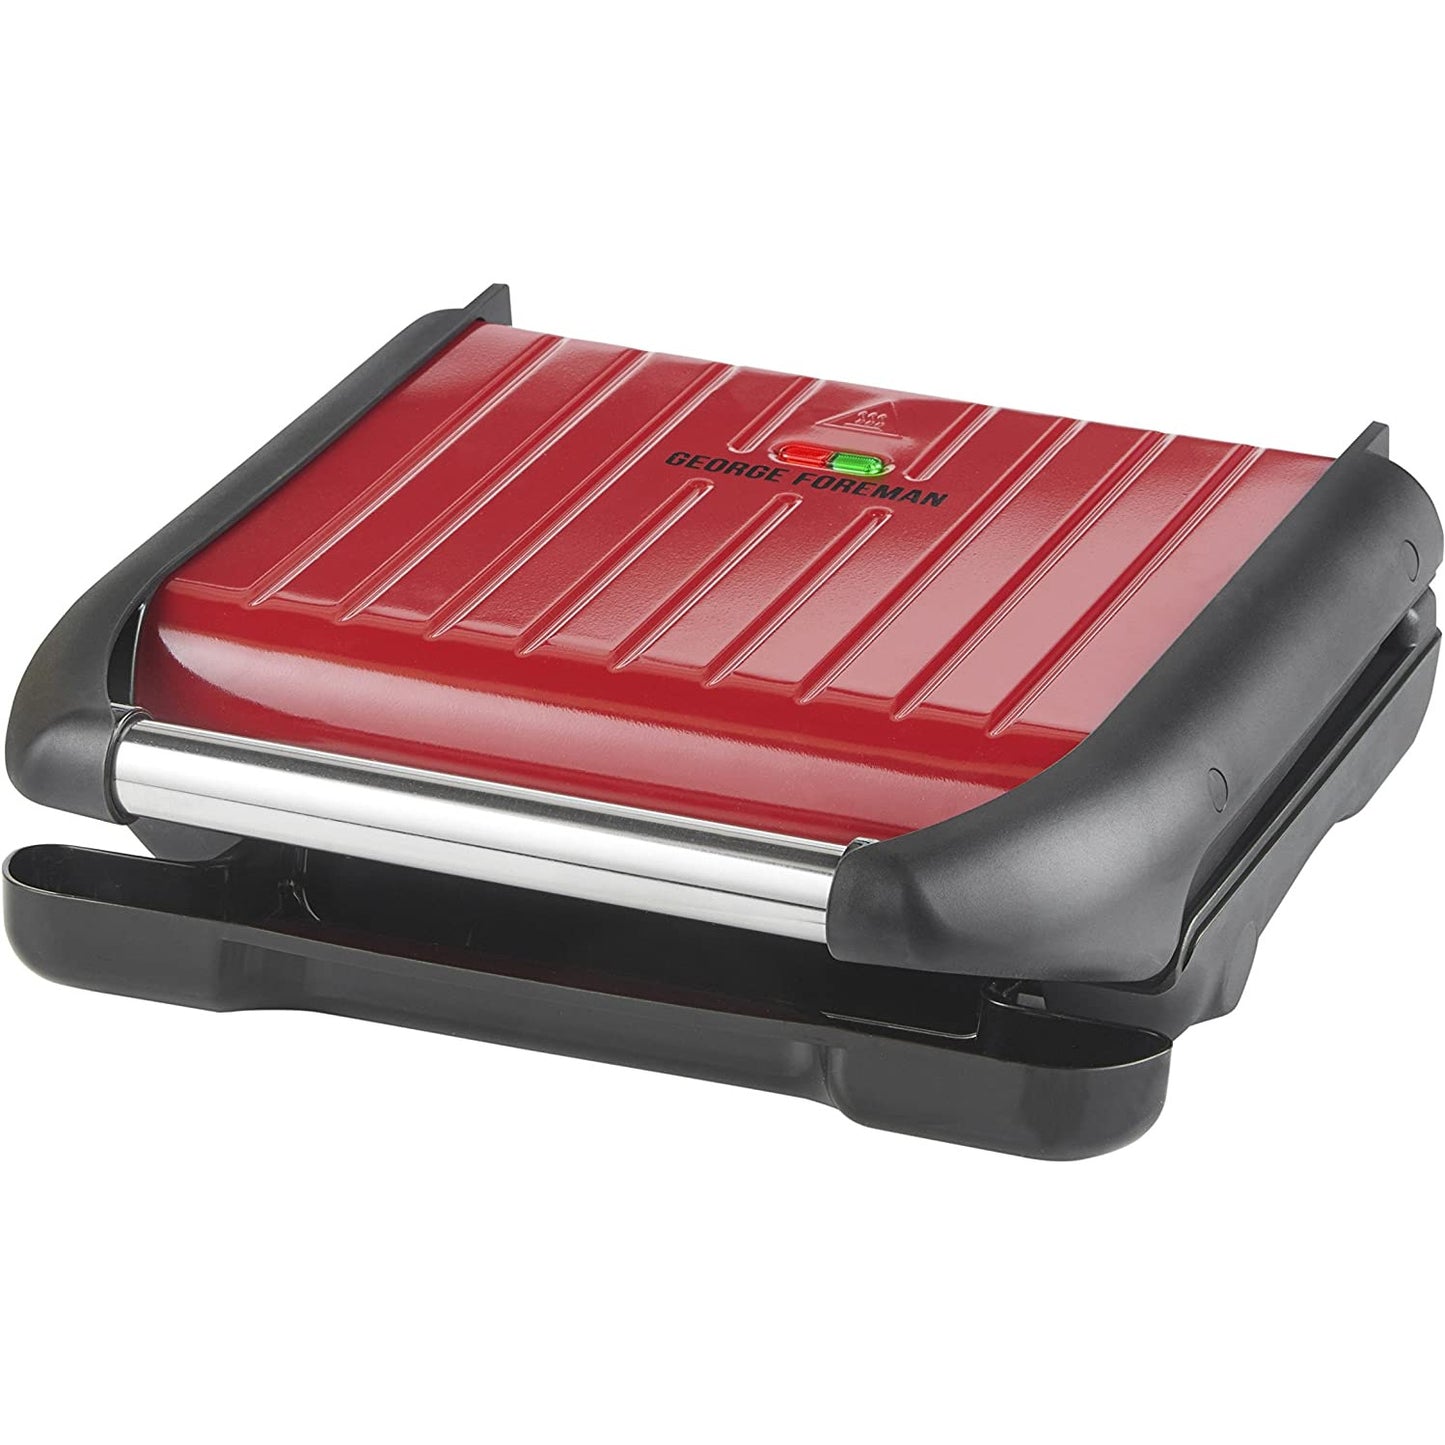 George Foreman grill 25040